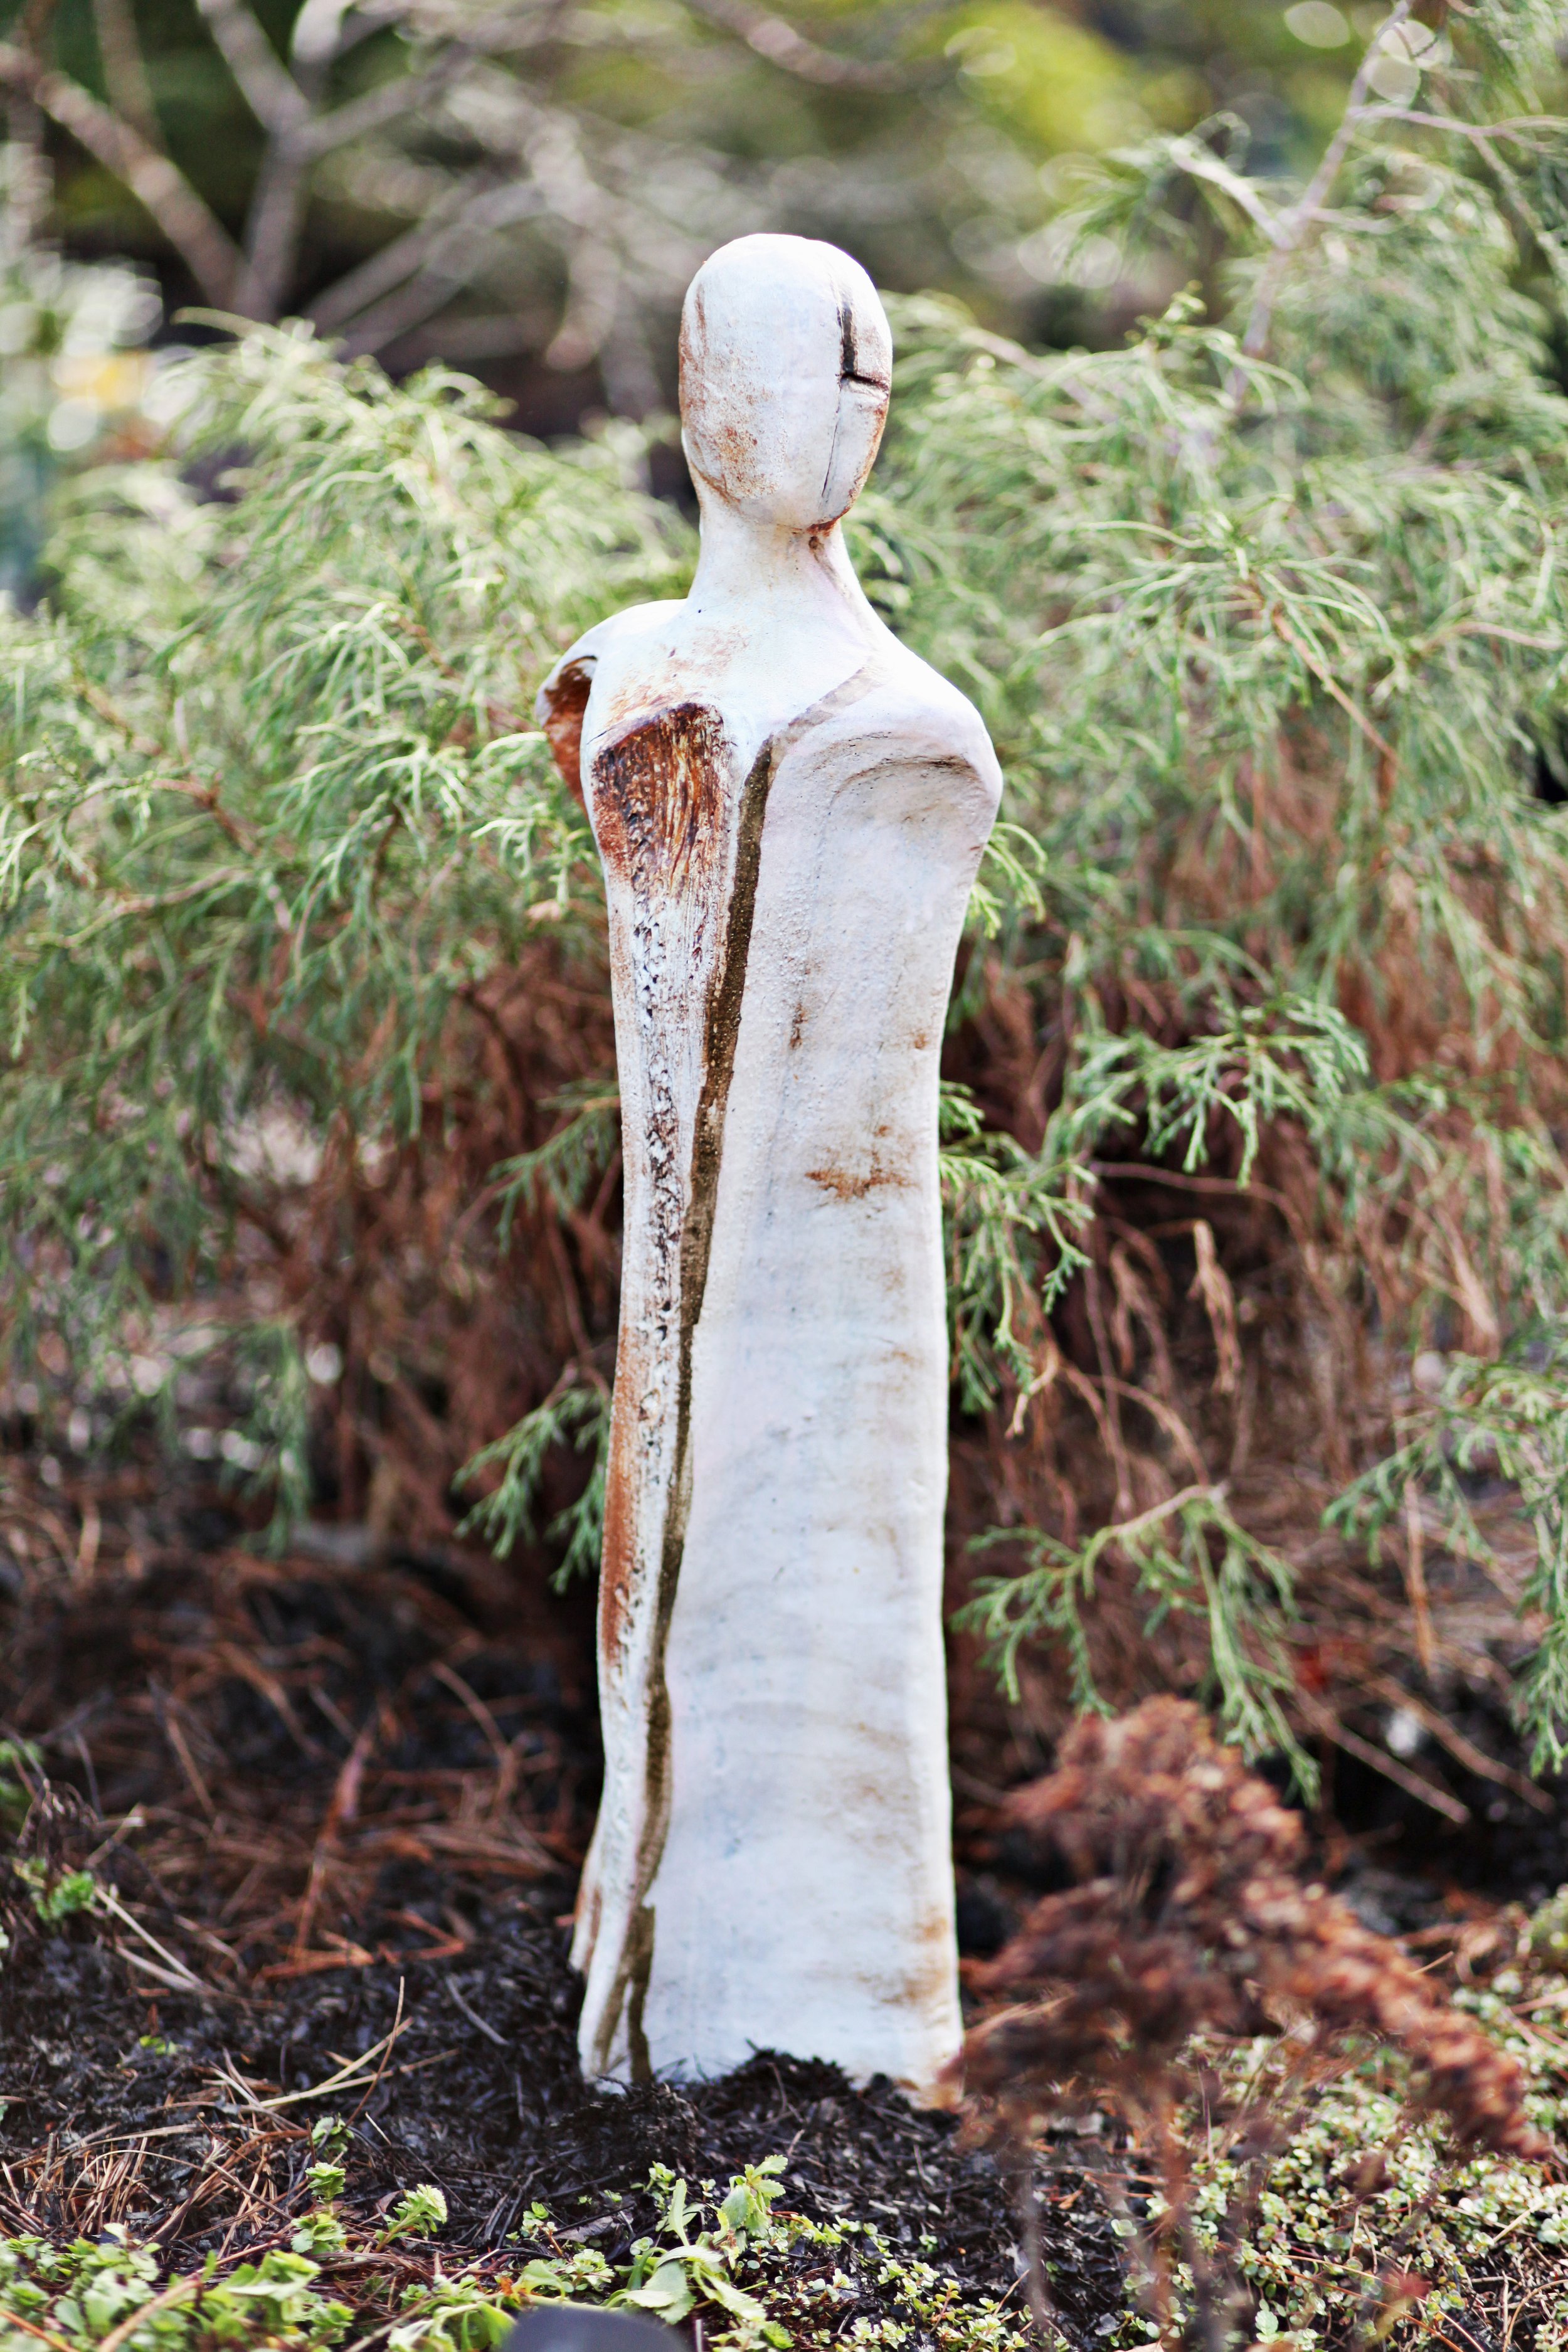 Garden Dilemmas, Delights & Discoveries, Ask Mary Stone Birch Tree's  Strength in Flexibility - Garden Dilemmas, Delights & Discoveries, Ask Mary  Stone